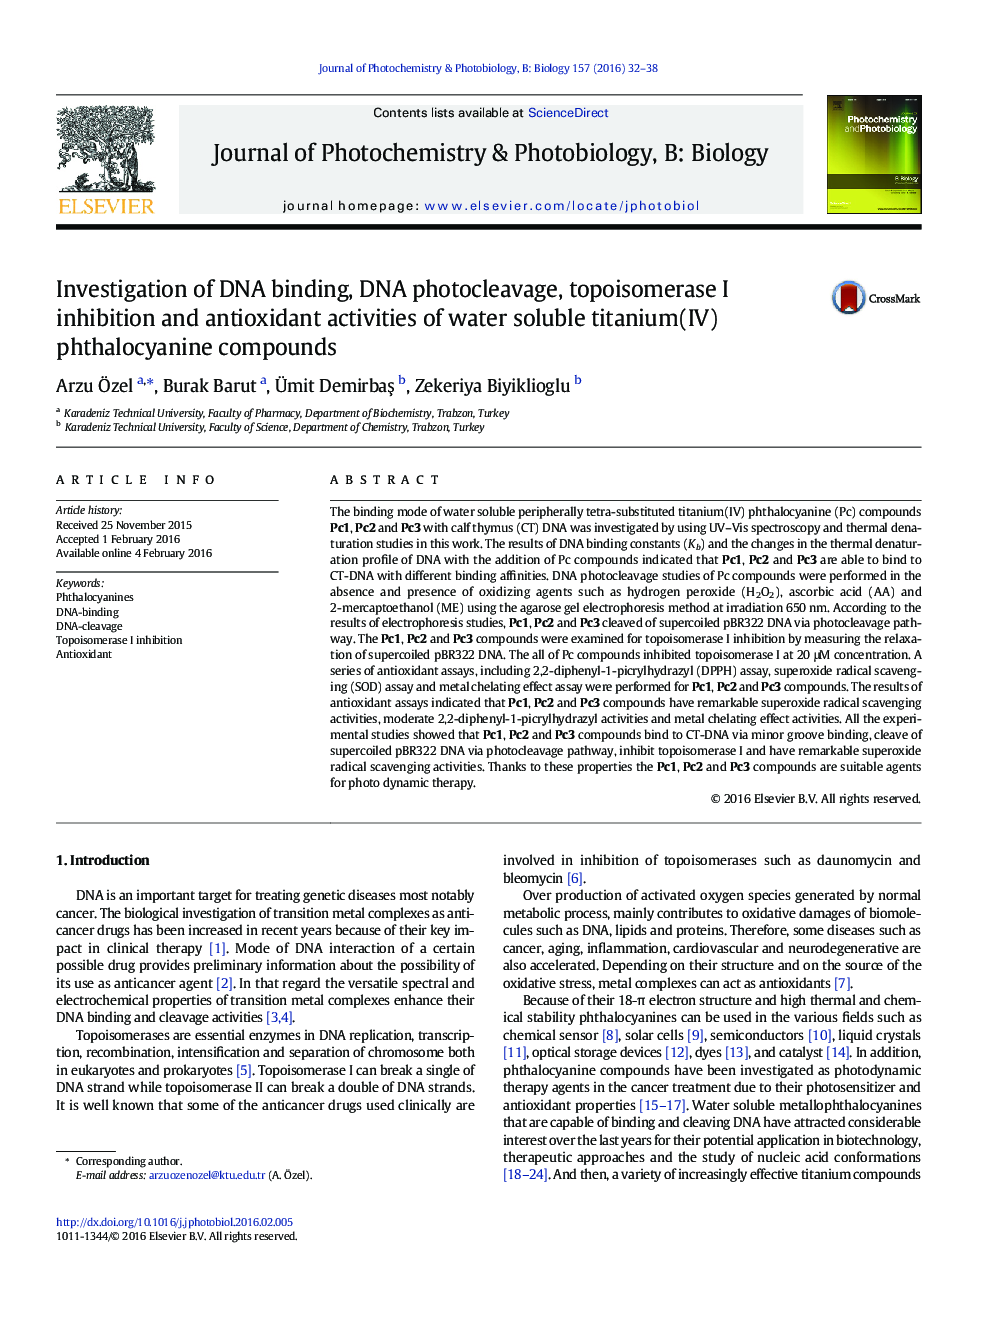 Investigation of DNA binding, DNA photocleavage, topoisomerase I inhibition and antioxidant activities of water soluble titanium(IV) phthalocyanine compounds